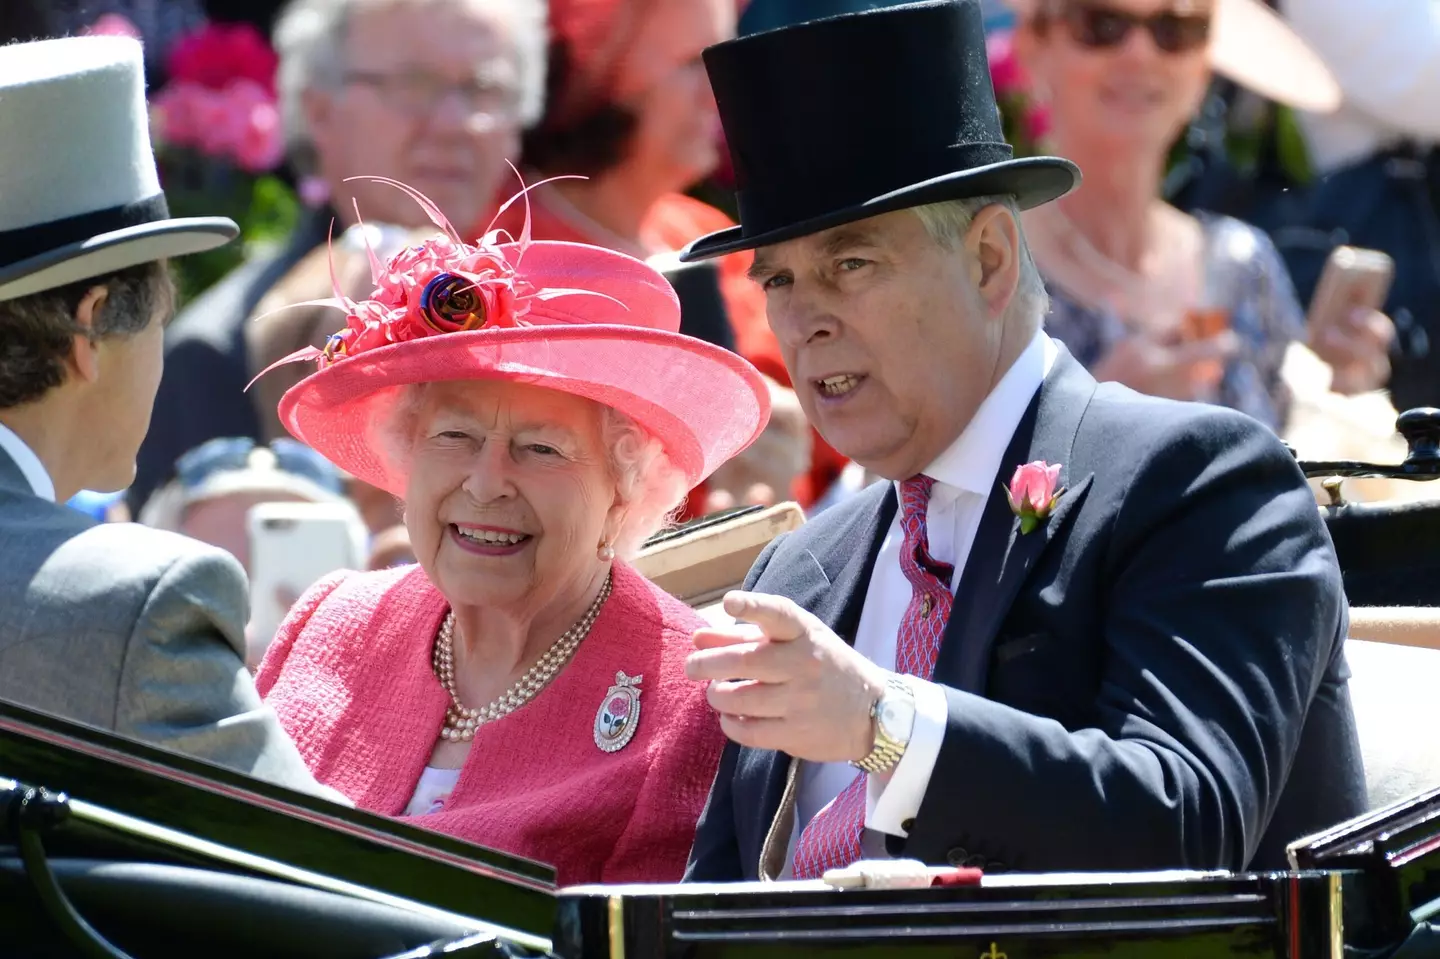 Prince Andrew announced he would be stepping down as a working royal.